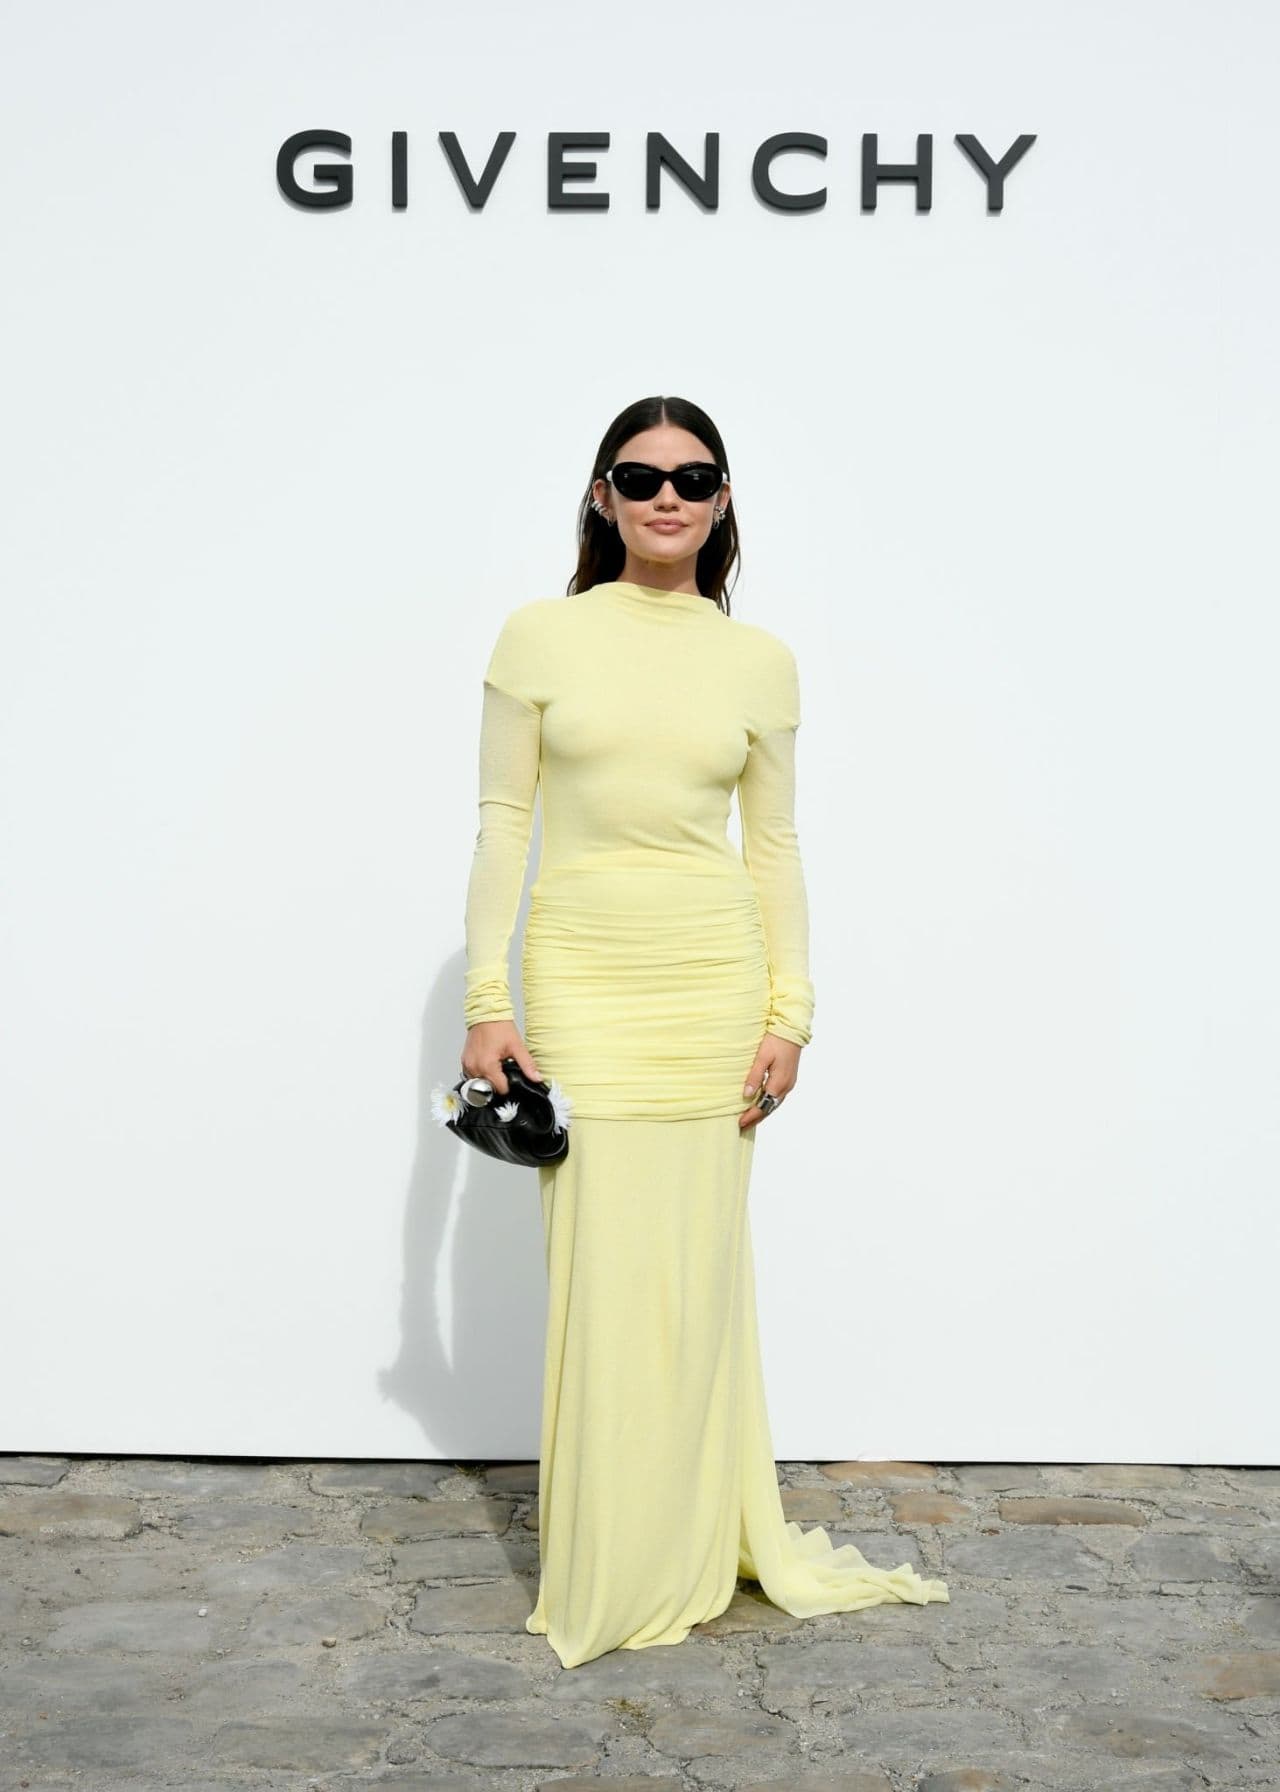 Lucy Hale Shines in Yellow Givenchy Gown at Paris Fashion Week